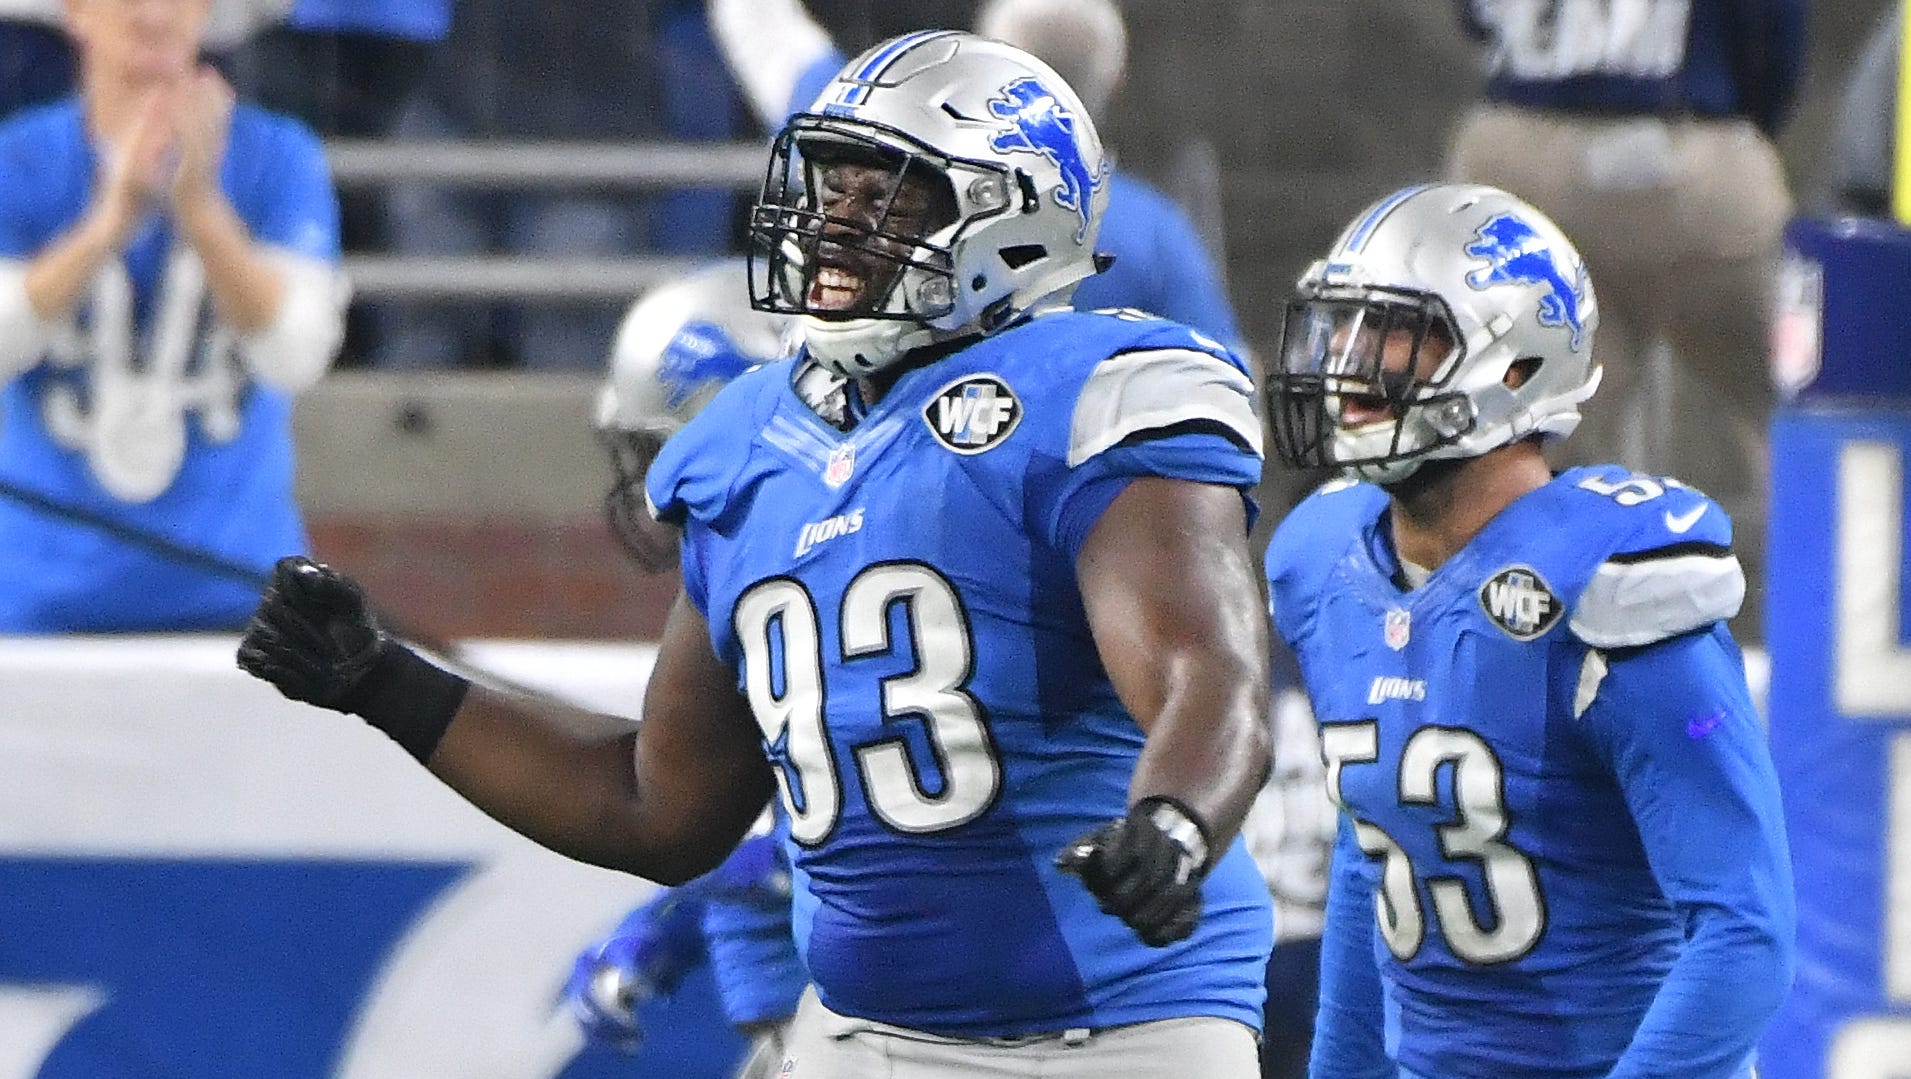 Lions Tyrunn Walker celebrates after stopping Rams running back Todd Gurley on 4th down and 1 to end the second quarter tied at 14.